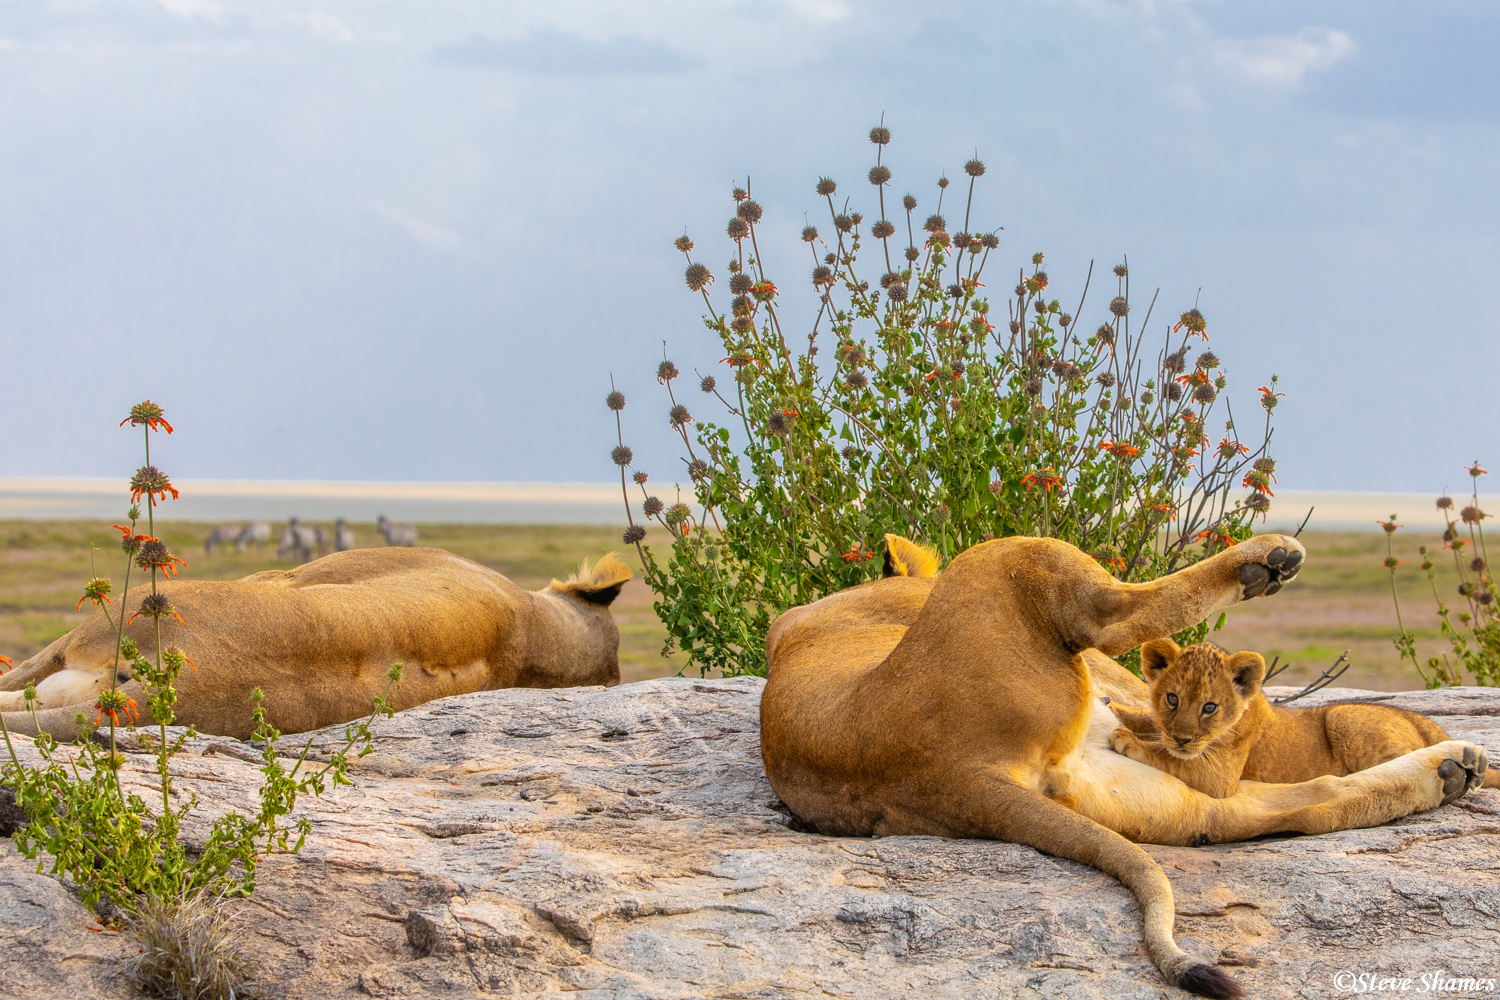 Mother lioness and cub, relaxing the day away on a big rock.